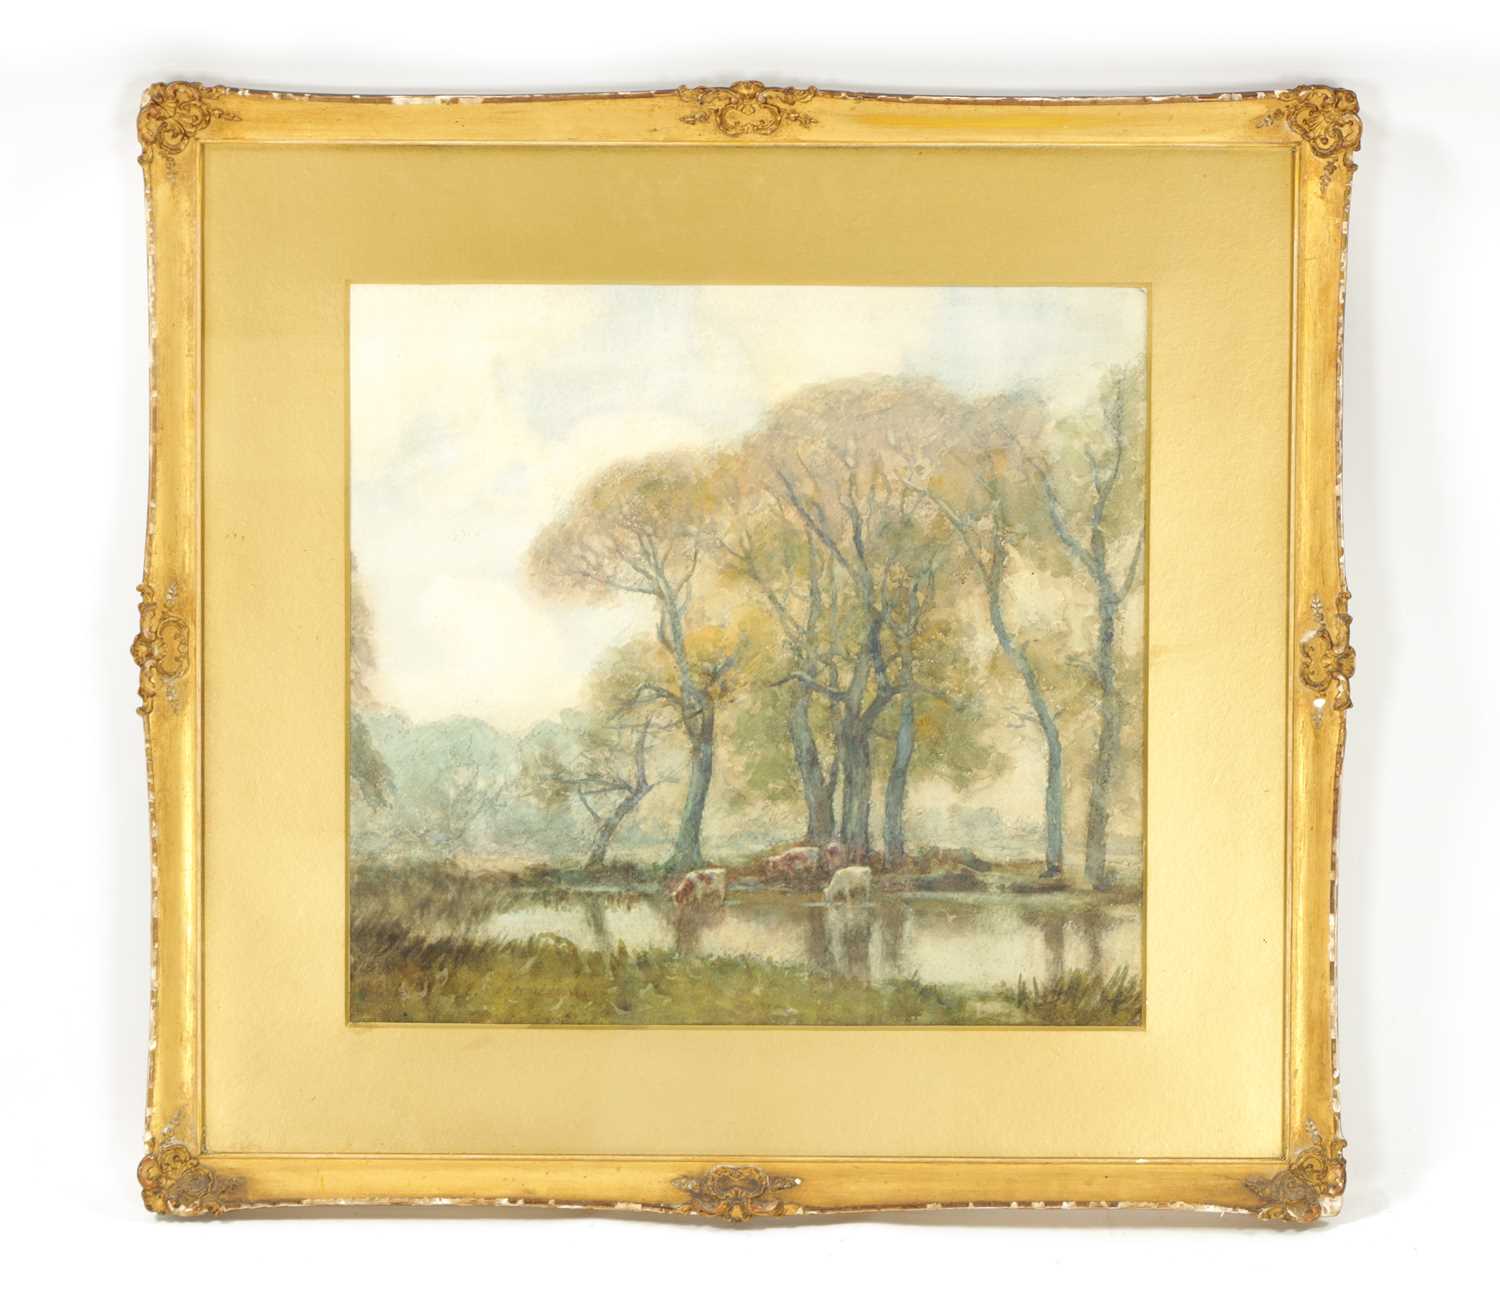 AN EARLY 20TH CENTURY WATERCOLOUR SIGNED BY DAVID BARKER